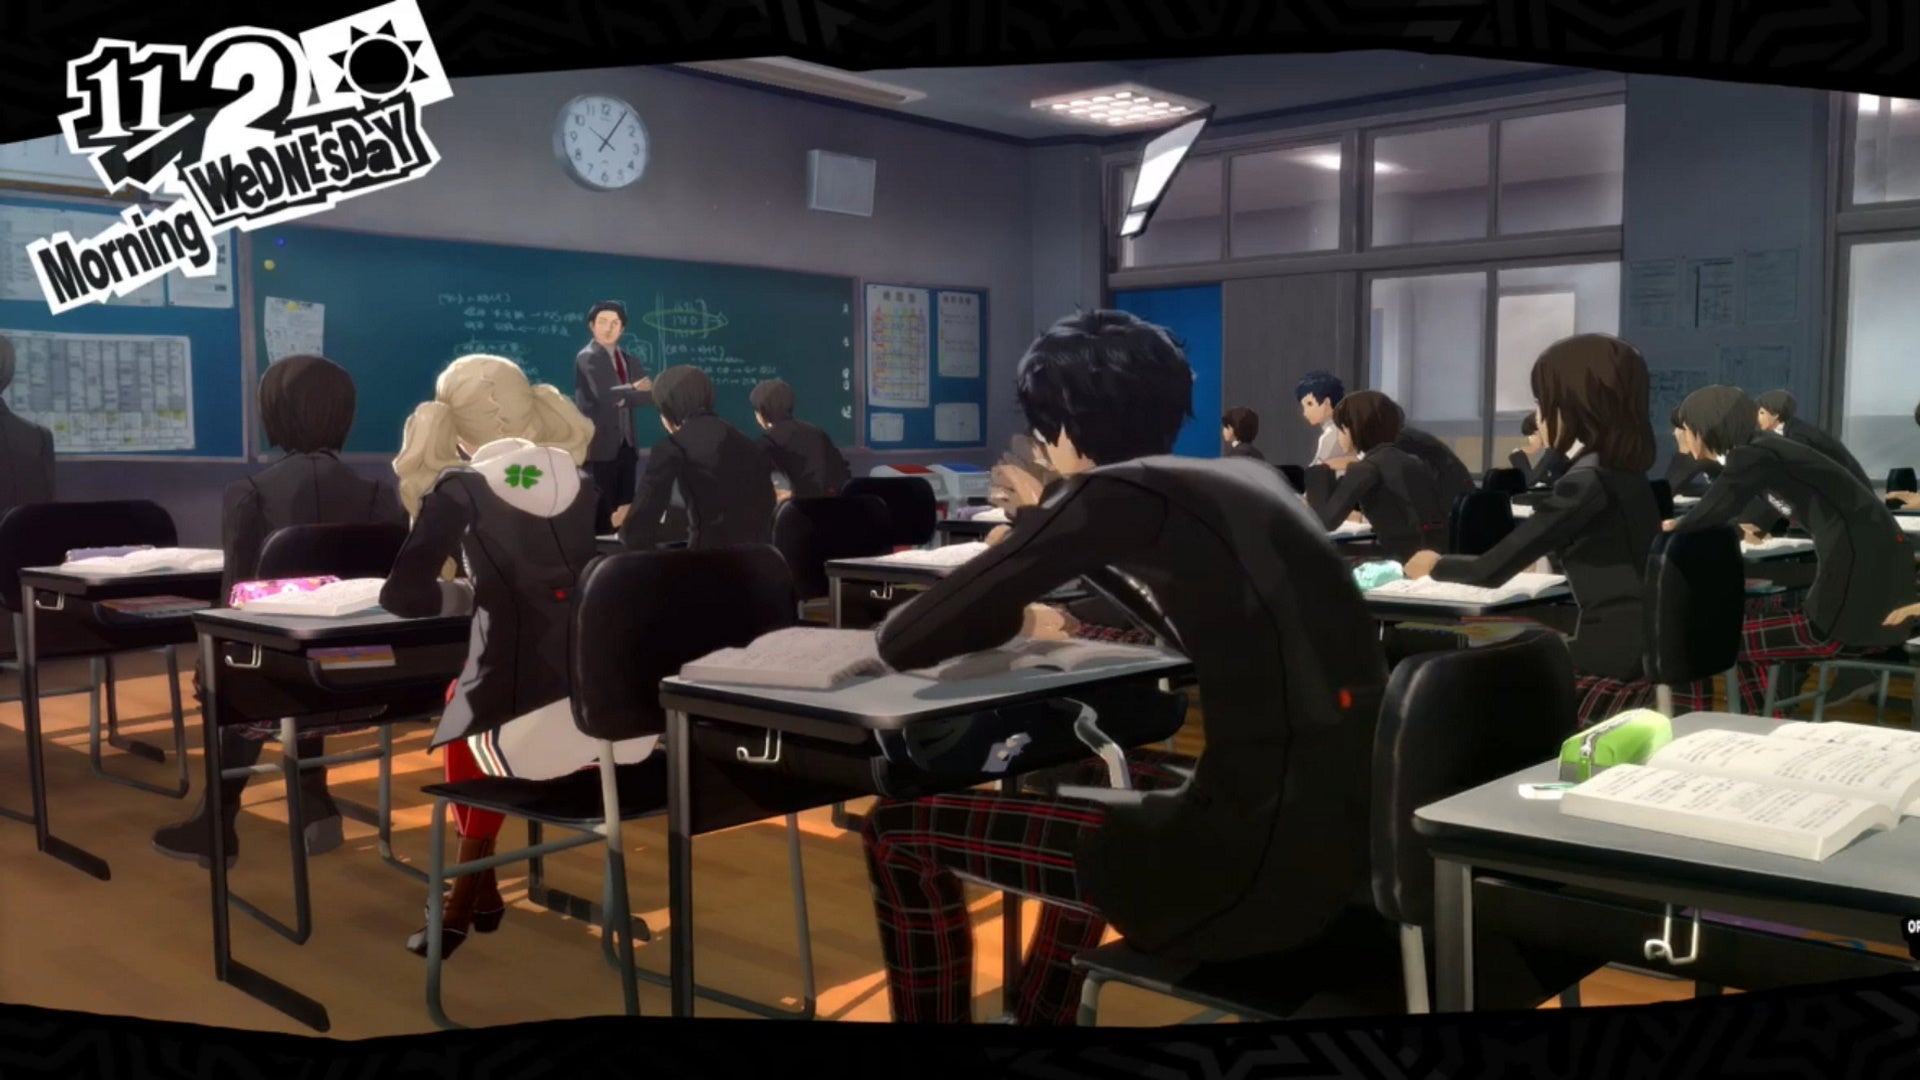 Persona 5 Royal classroom answers November: An anime teenager has an exclamation mark above his head while sitting at his desk in a classroom